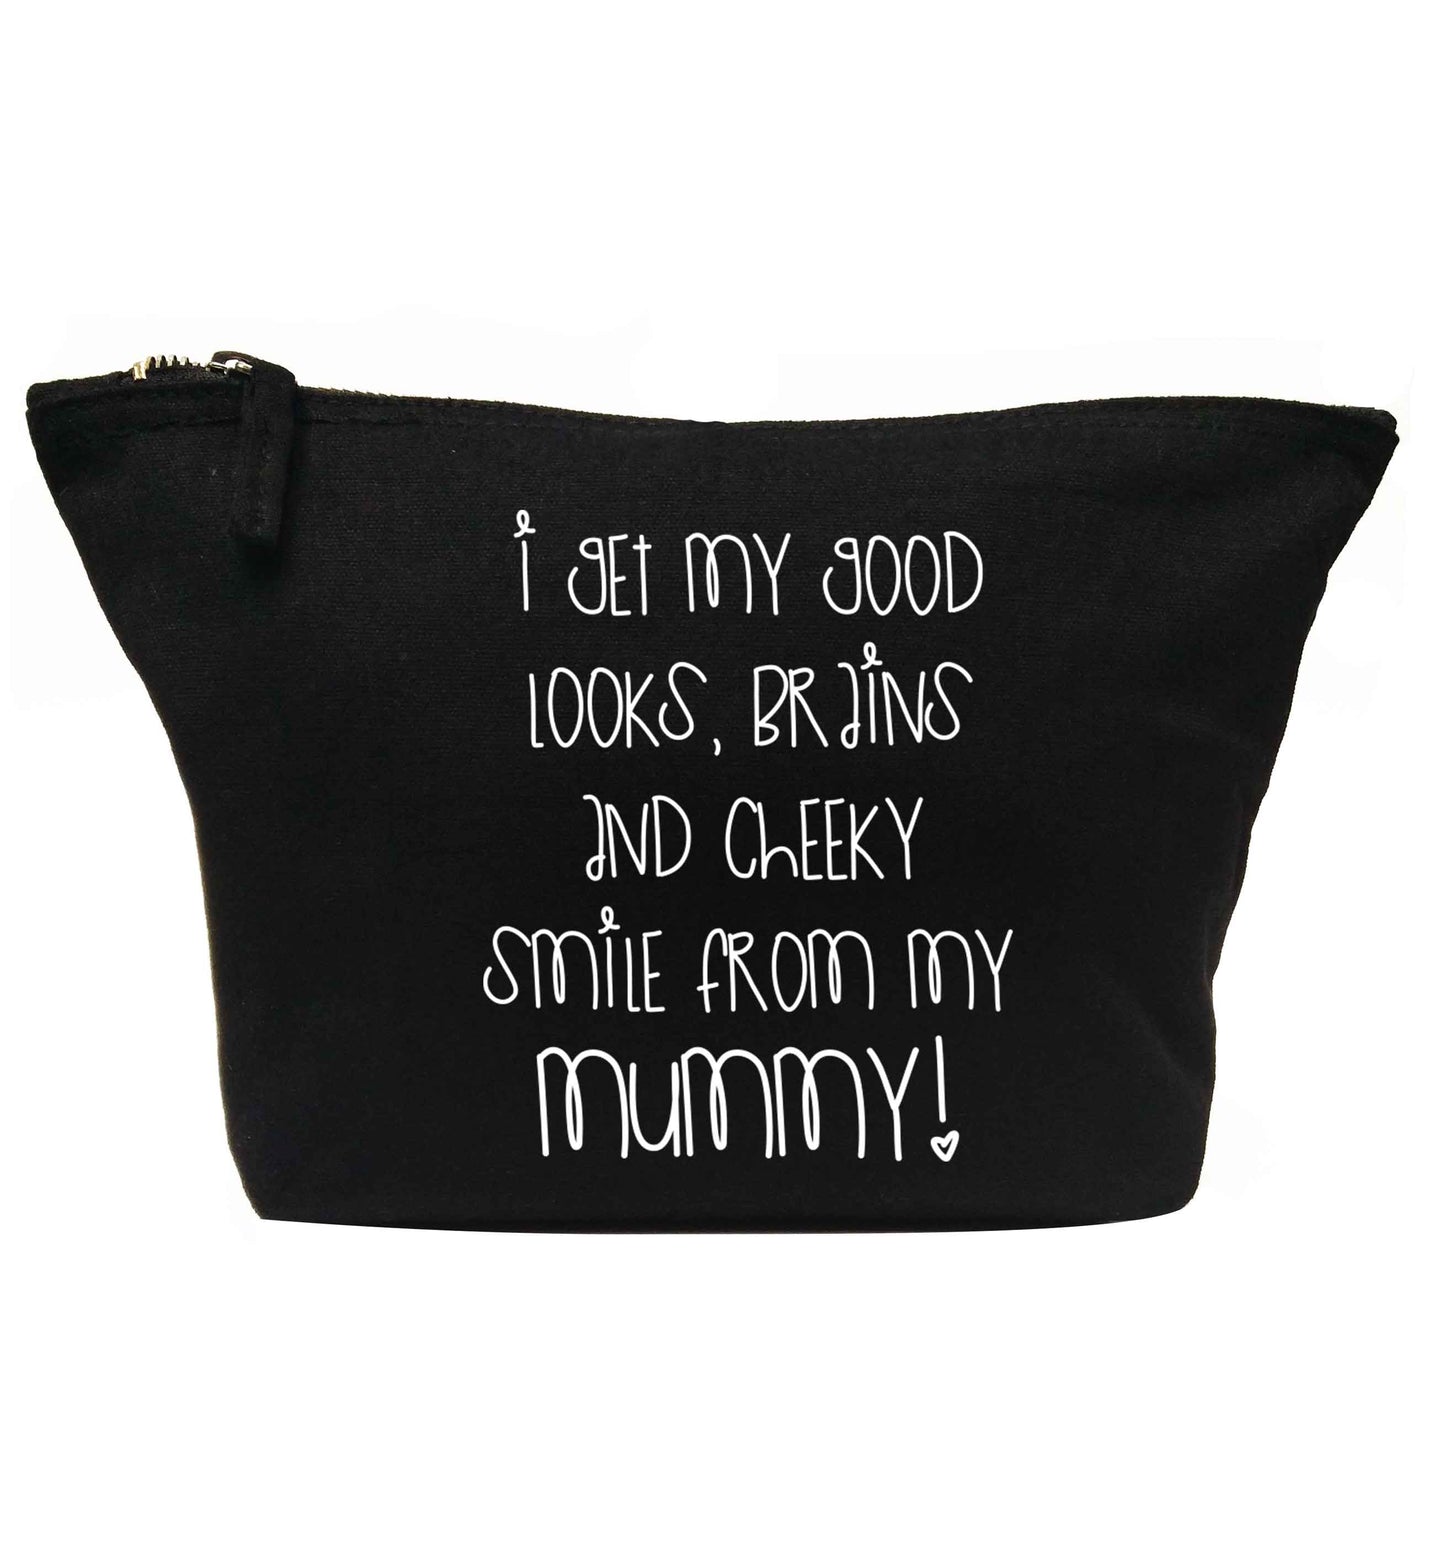 I get my good looks, brains and cheeky smile from my mummy | Makeup / wash bag